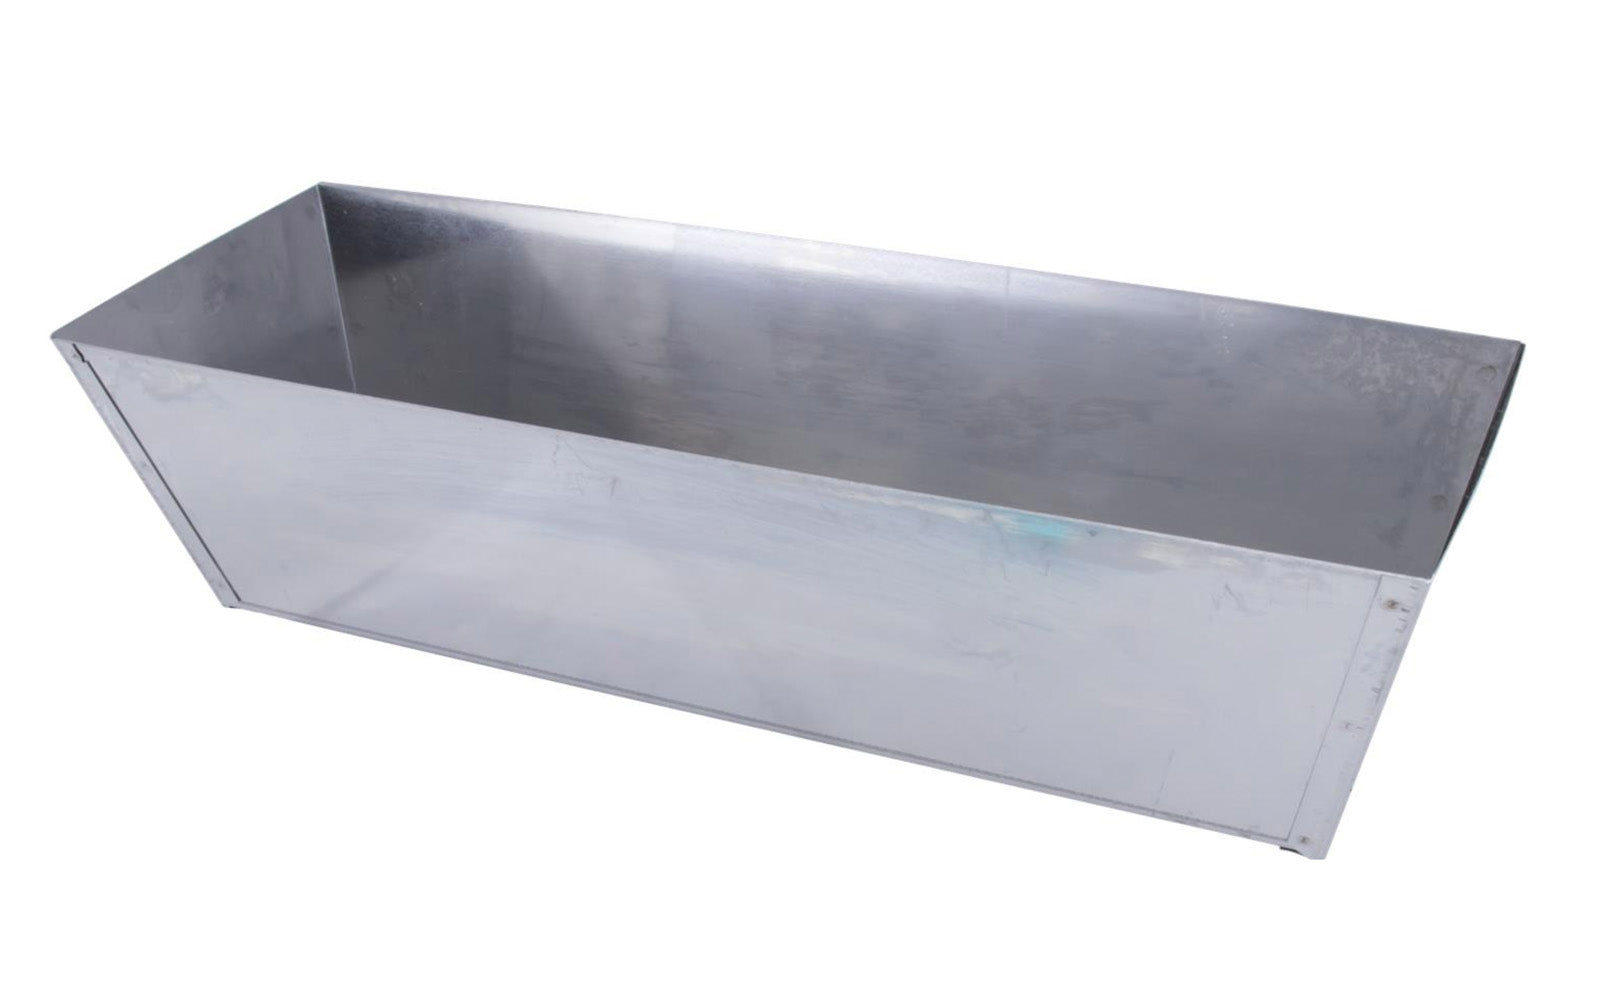 Marshalltown Stainless Steel Mud Pan. These mud pans hold material while you work and are designed to make it easy to clean knives while not letting material get stuck in the corners. 12" length. Marshalltown Model 812 ~ 035965063906